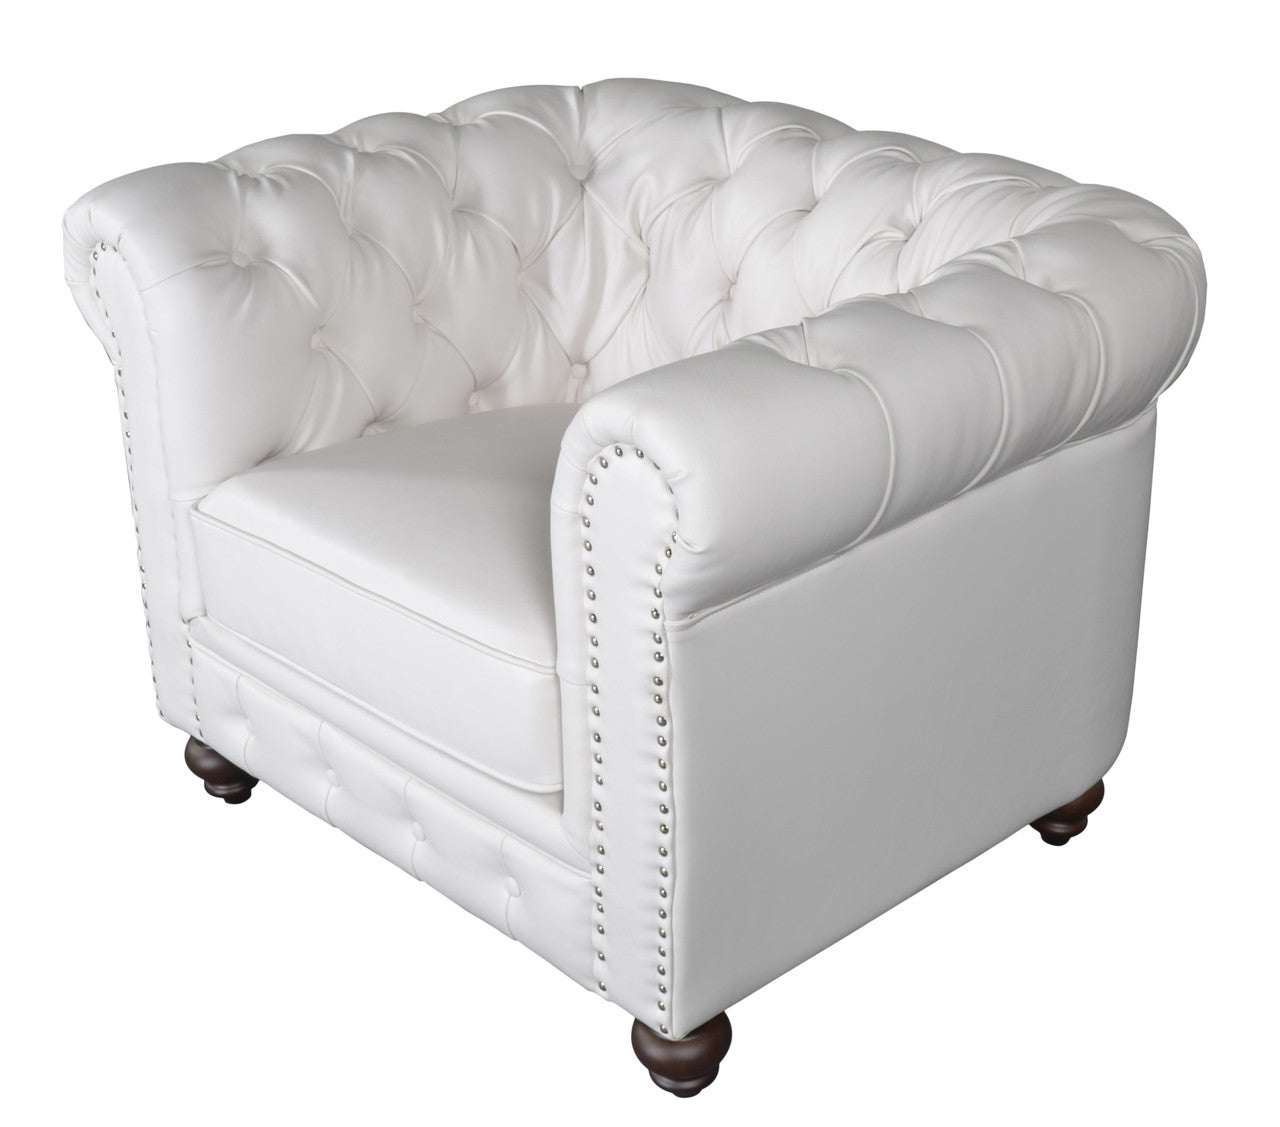 AFD Home Classic Chesterfield White Chair 12020360